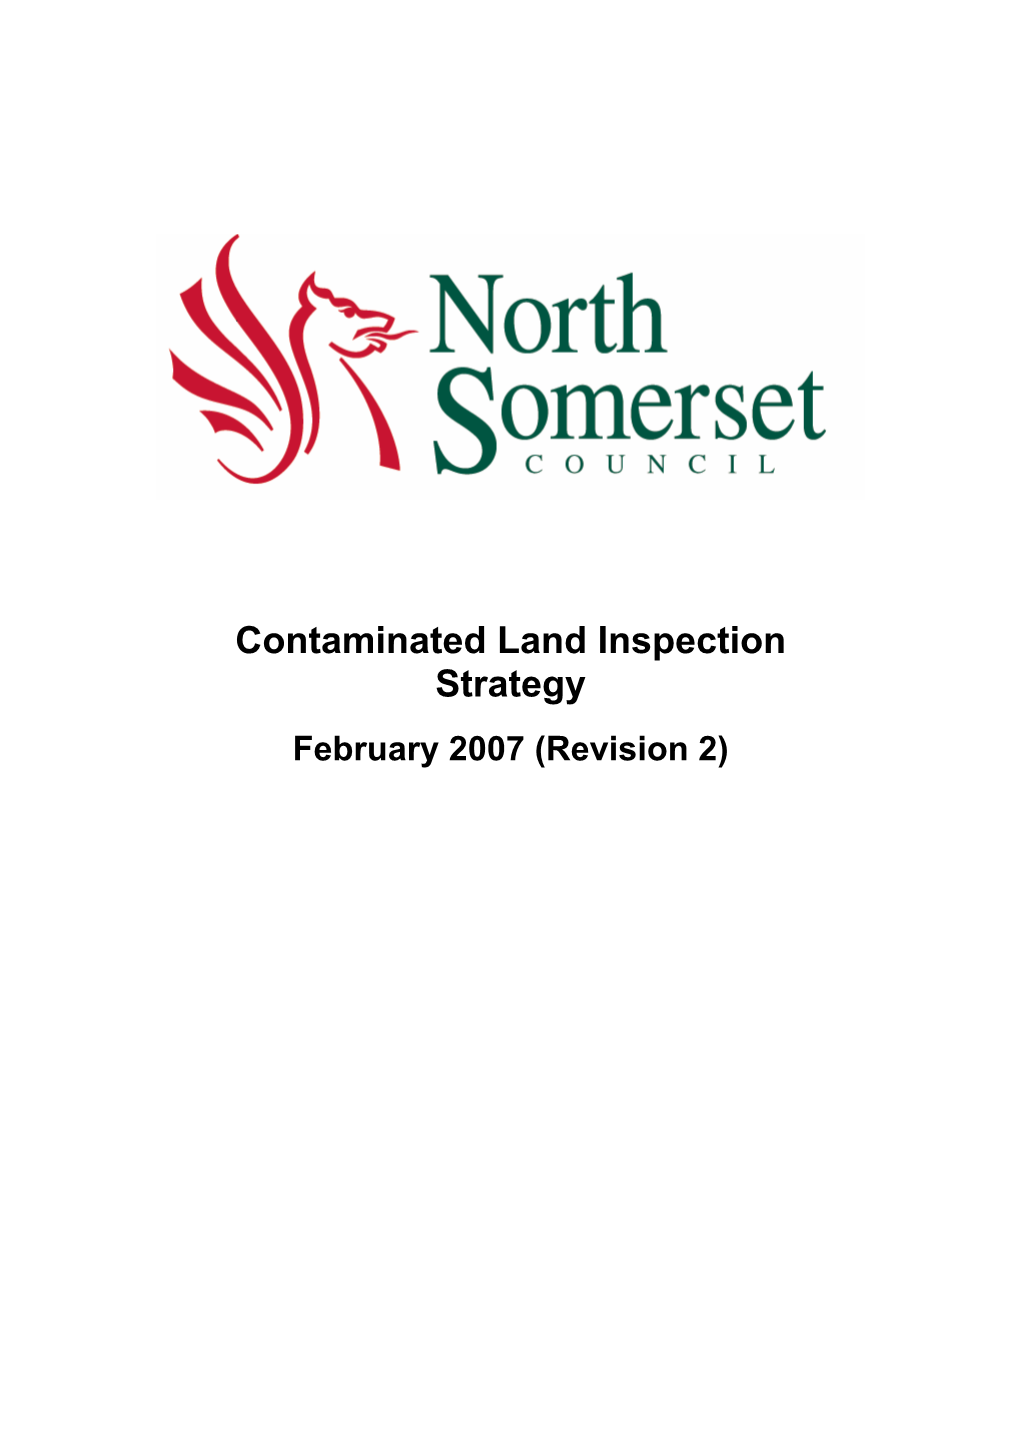 Contaminated Land Inspection Strategy February 2007